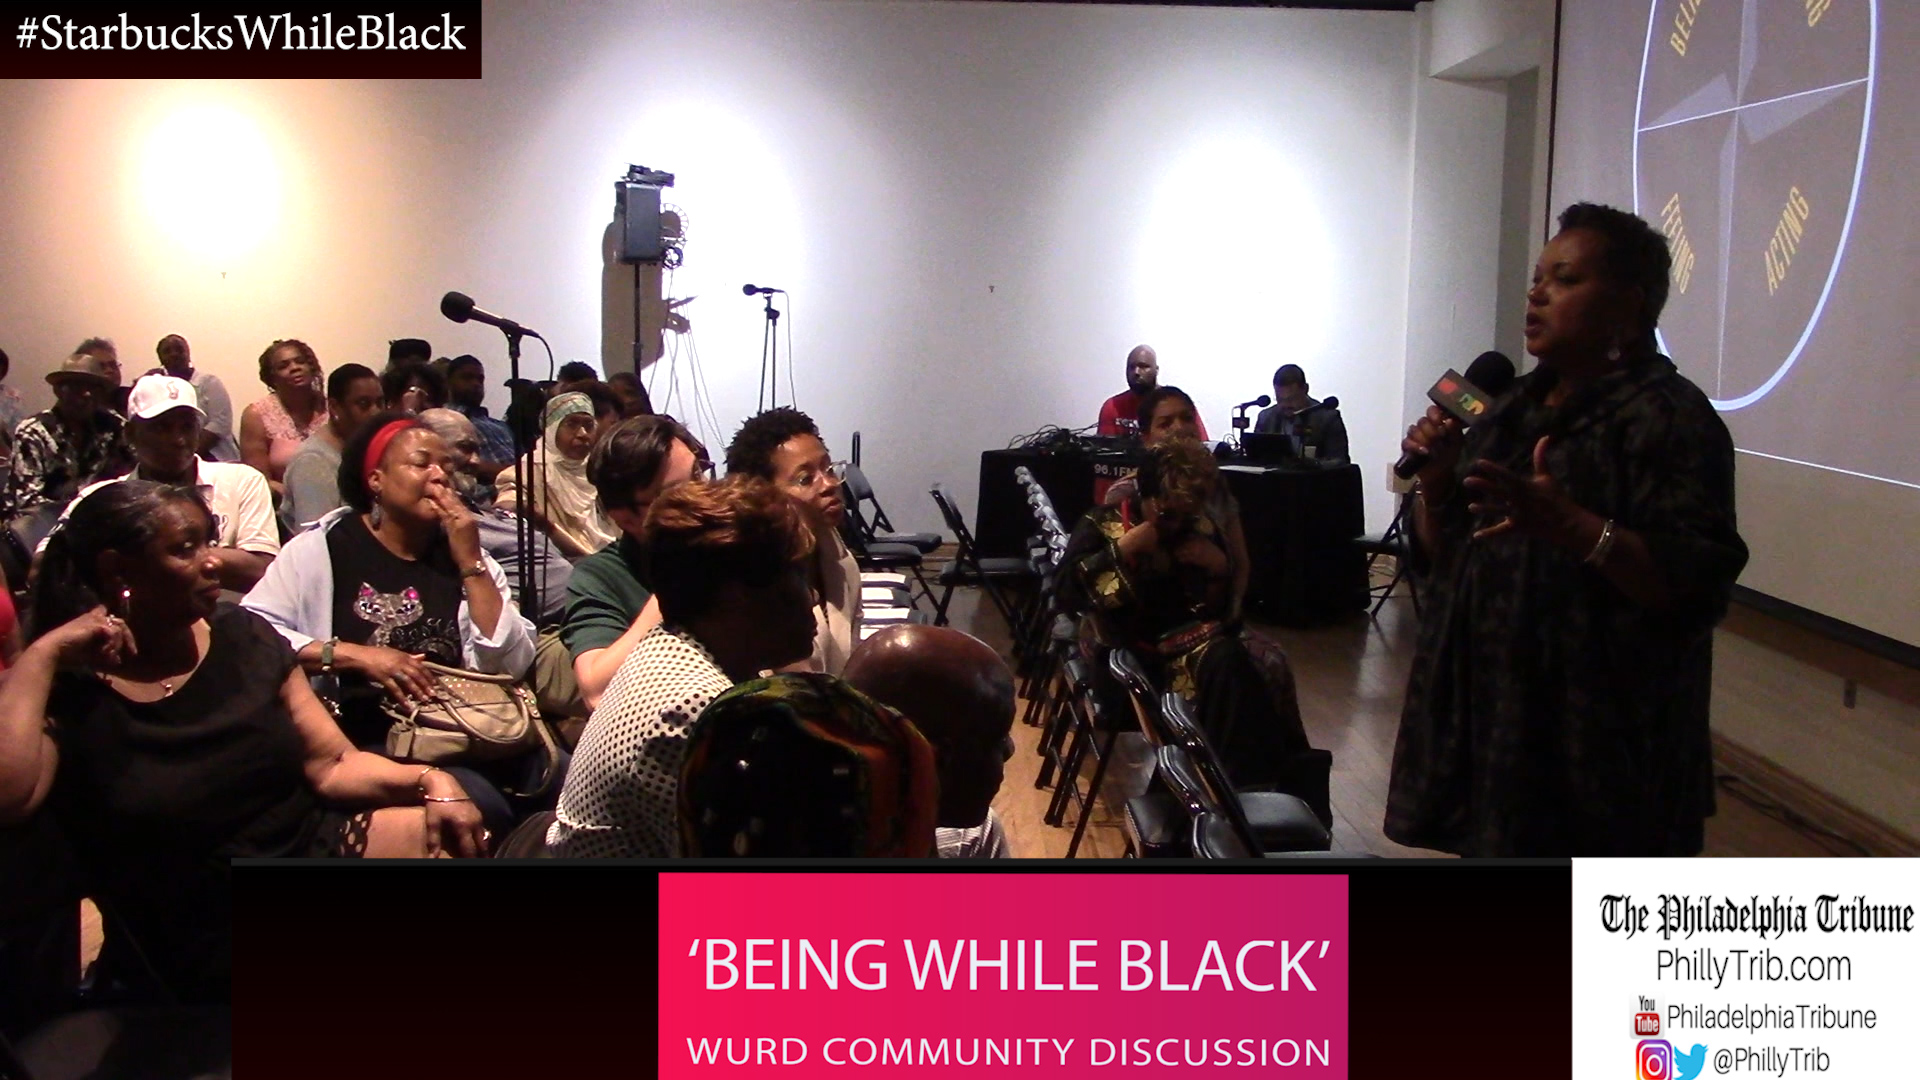 05/31/18 : #StarbucksWhileBlack prompts ‘Being While Black’ WURD Radio community discussion